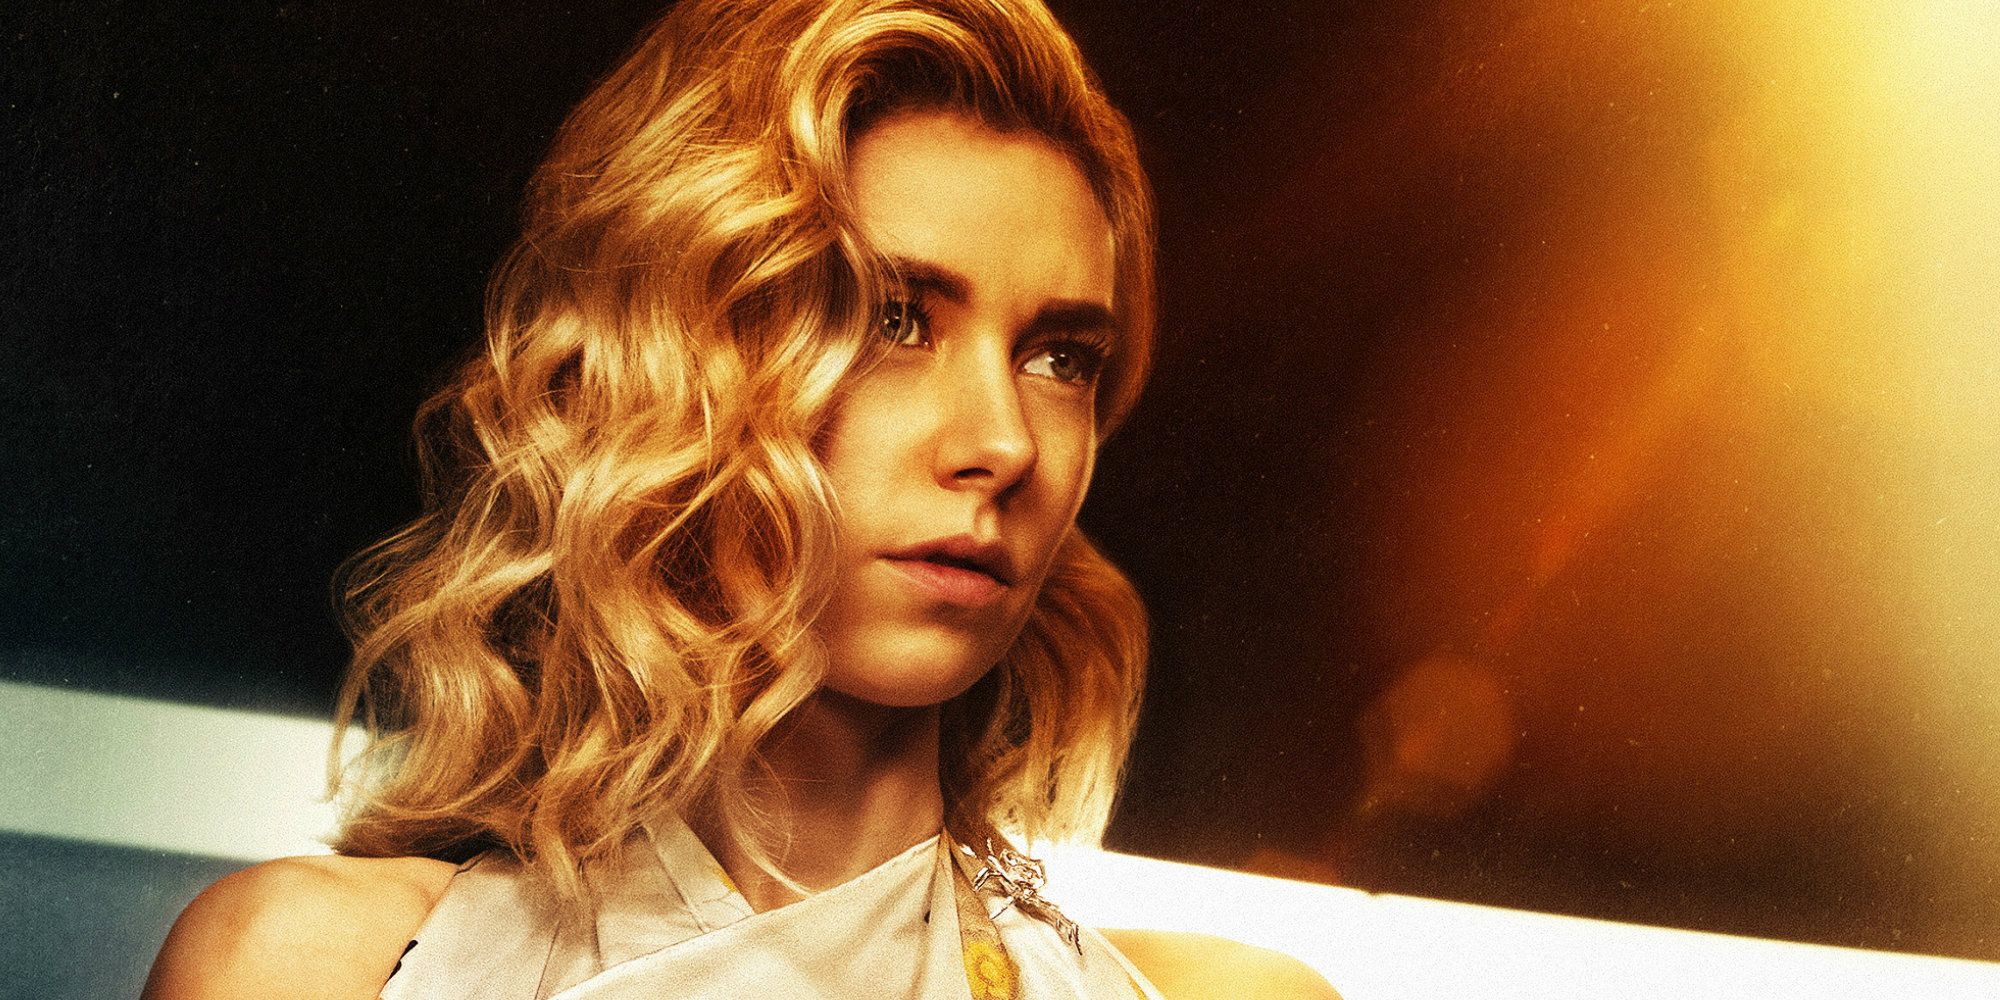 Vanessa-Kirby-as-The-White-Widow-in-Mission-Impossible-Fallout.jpg